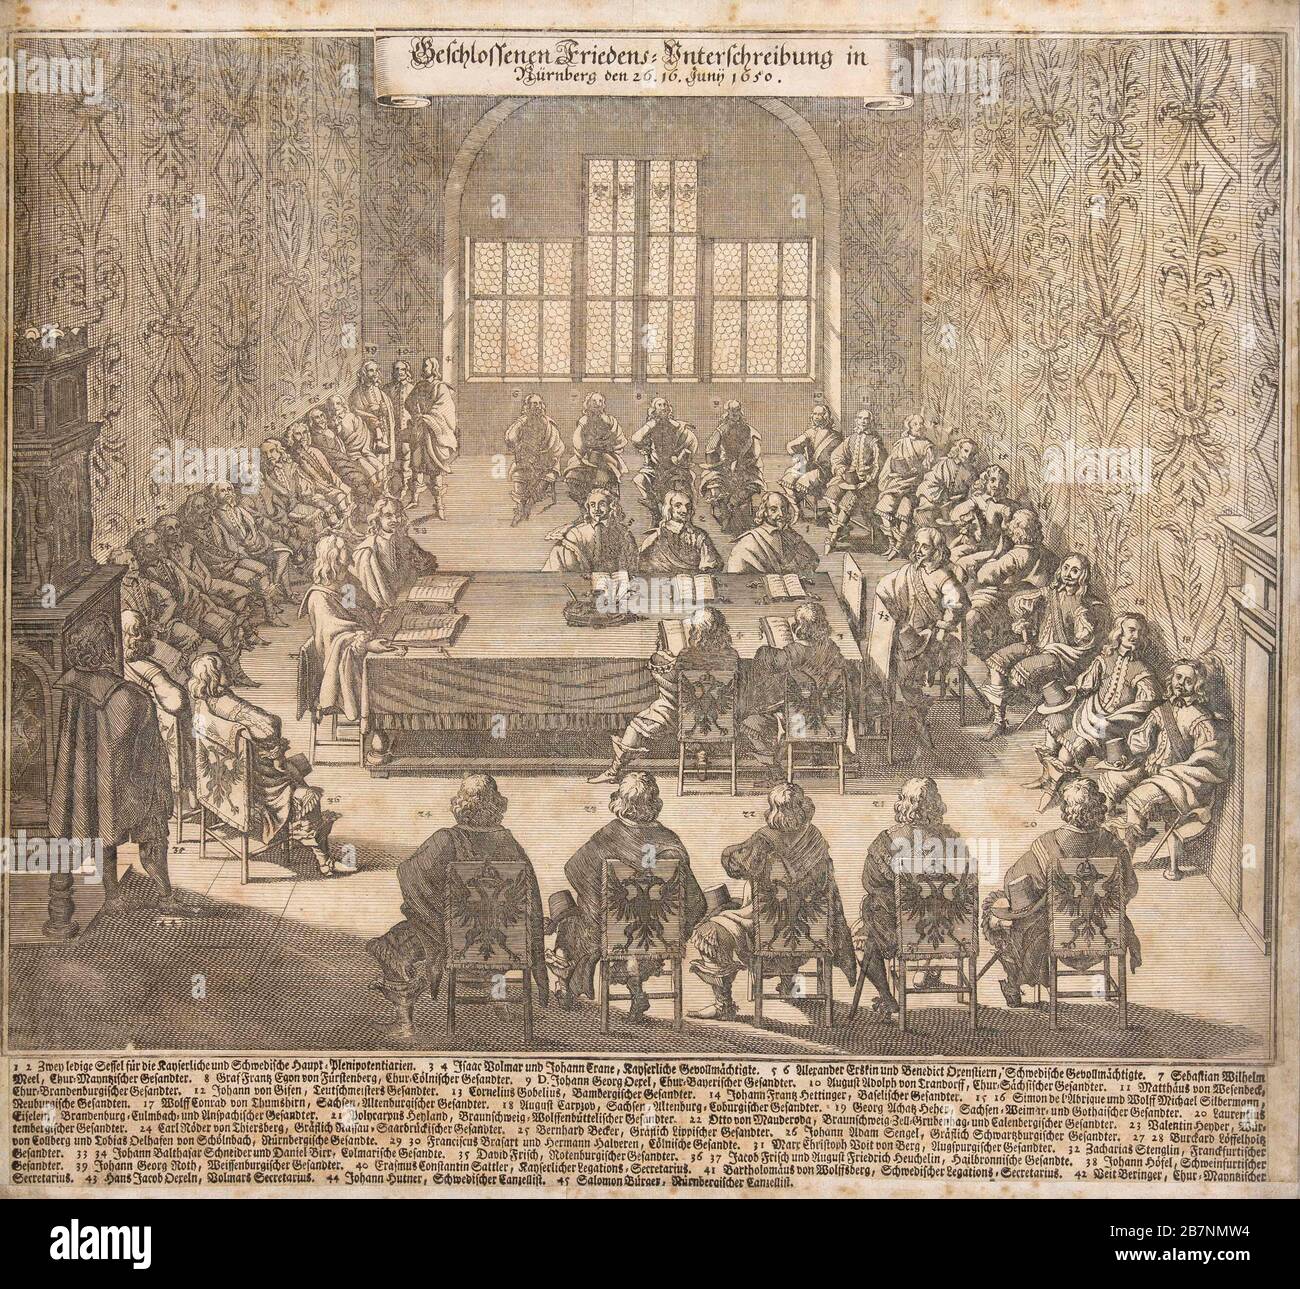 The ratification of the Peace of Westphalia in Nuremberg on June 26, 1650, 1650. Private Collection. Stock Photo